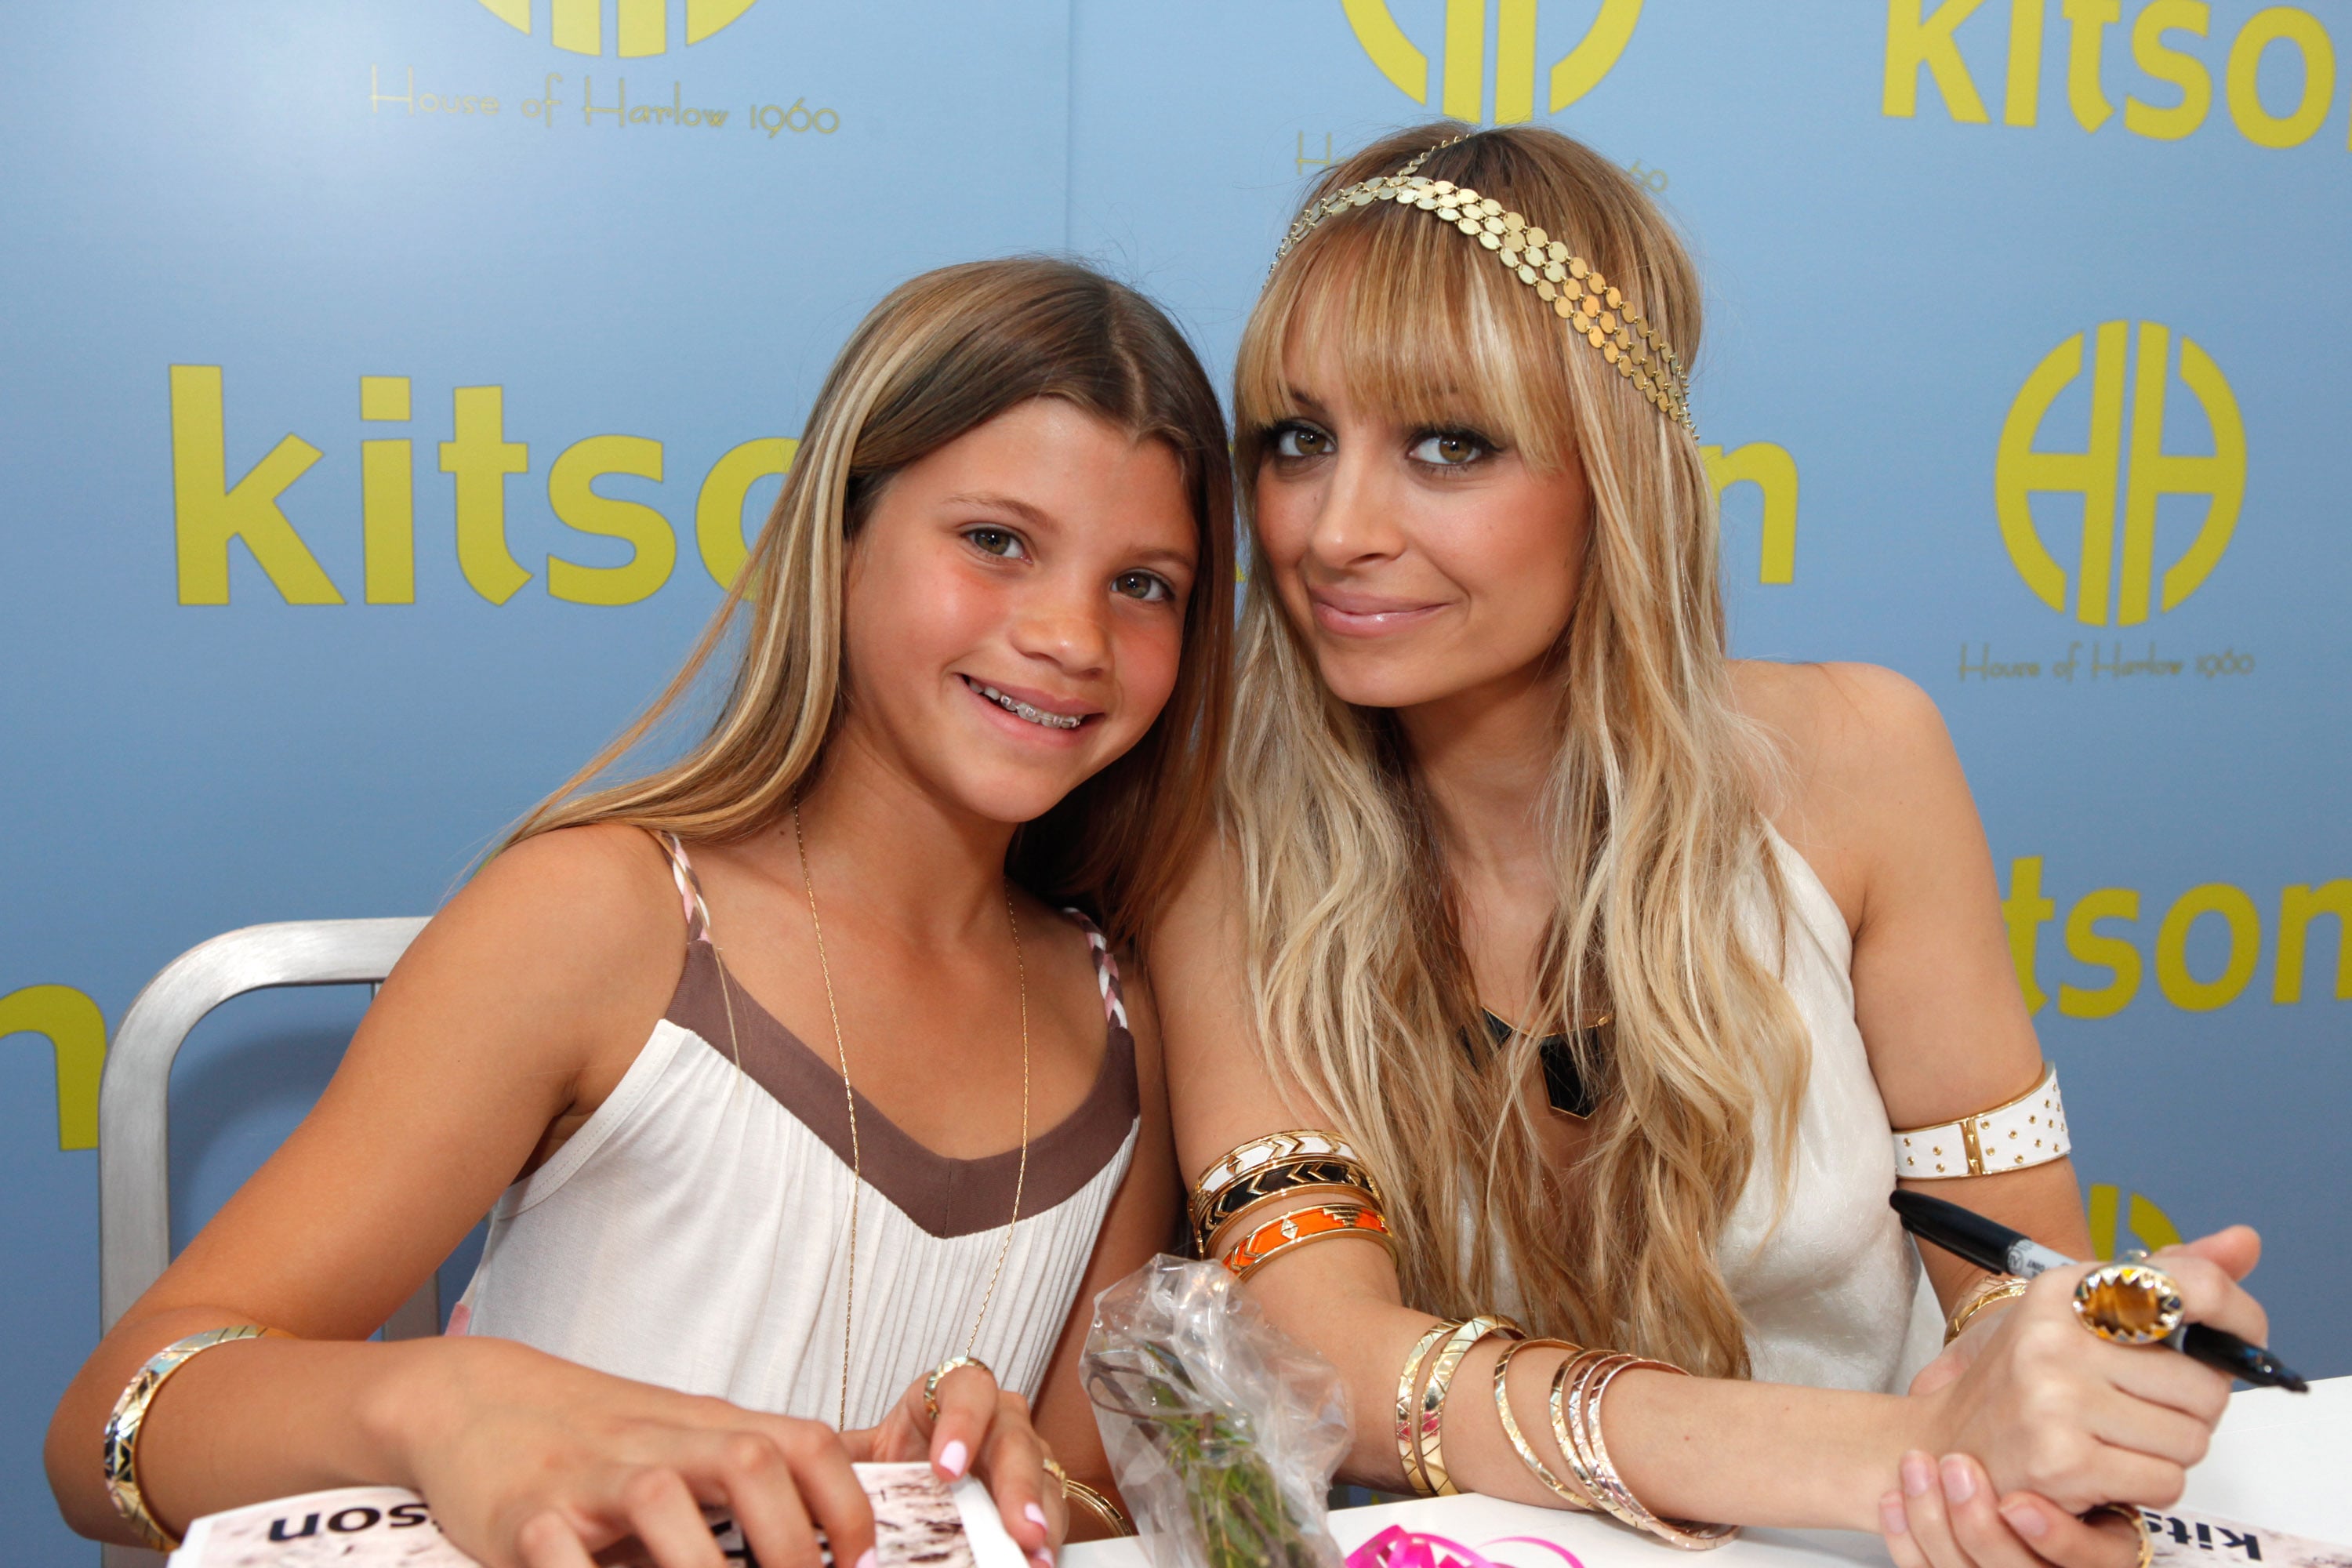 Sofia and Nicole Richie Had the Cutest Sister Moment in Matching